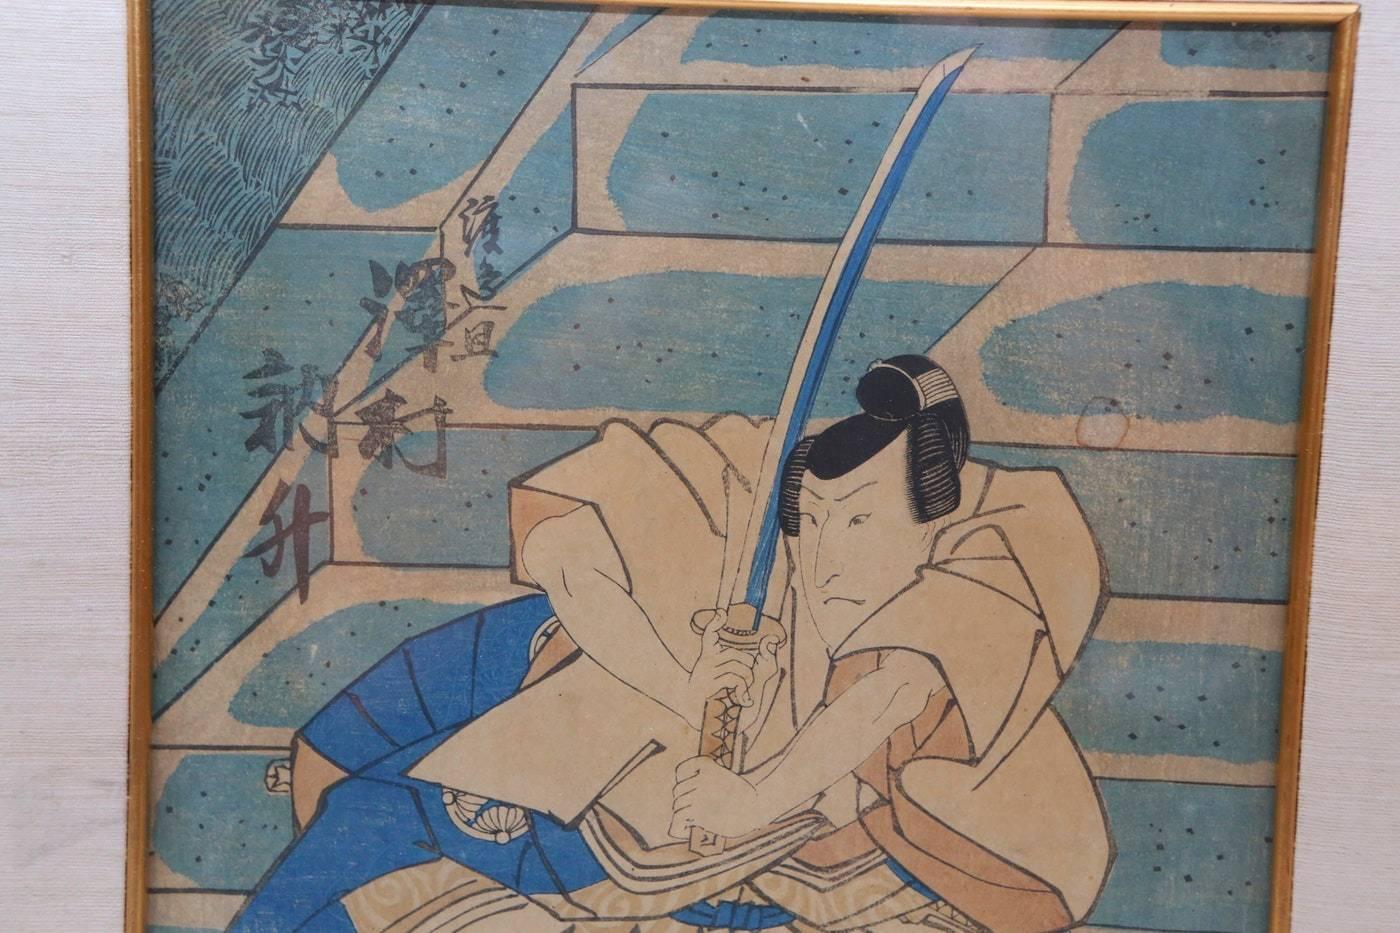 A 19th century impression of a woodblock print by Utagawa Kunisada, also known as Utagawa Toyokuni III. The preint depicts the Kabuki actor Sawamura Tossho as Watanabe no Wataru and is the left print of an original diptych. The actor's name and role